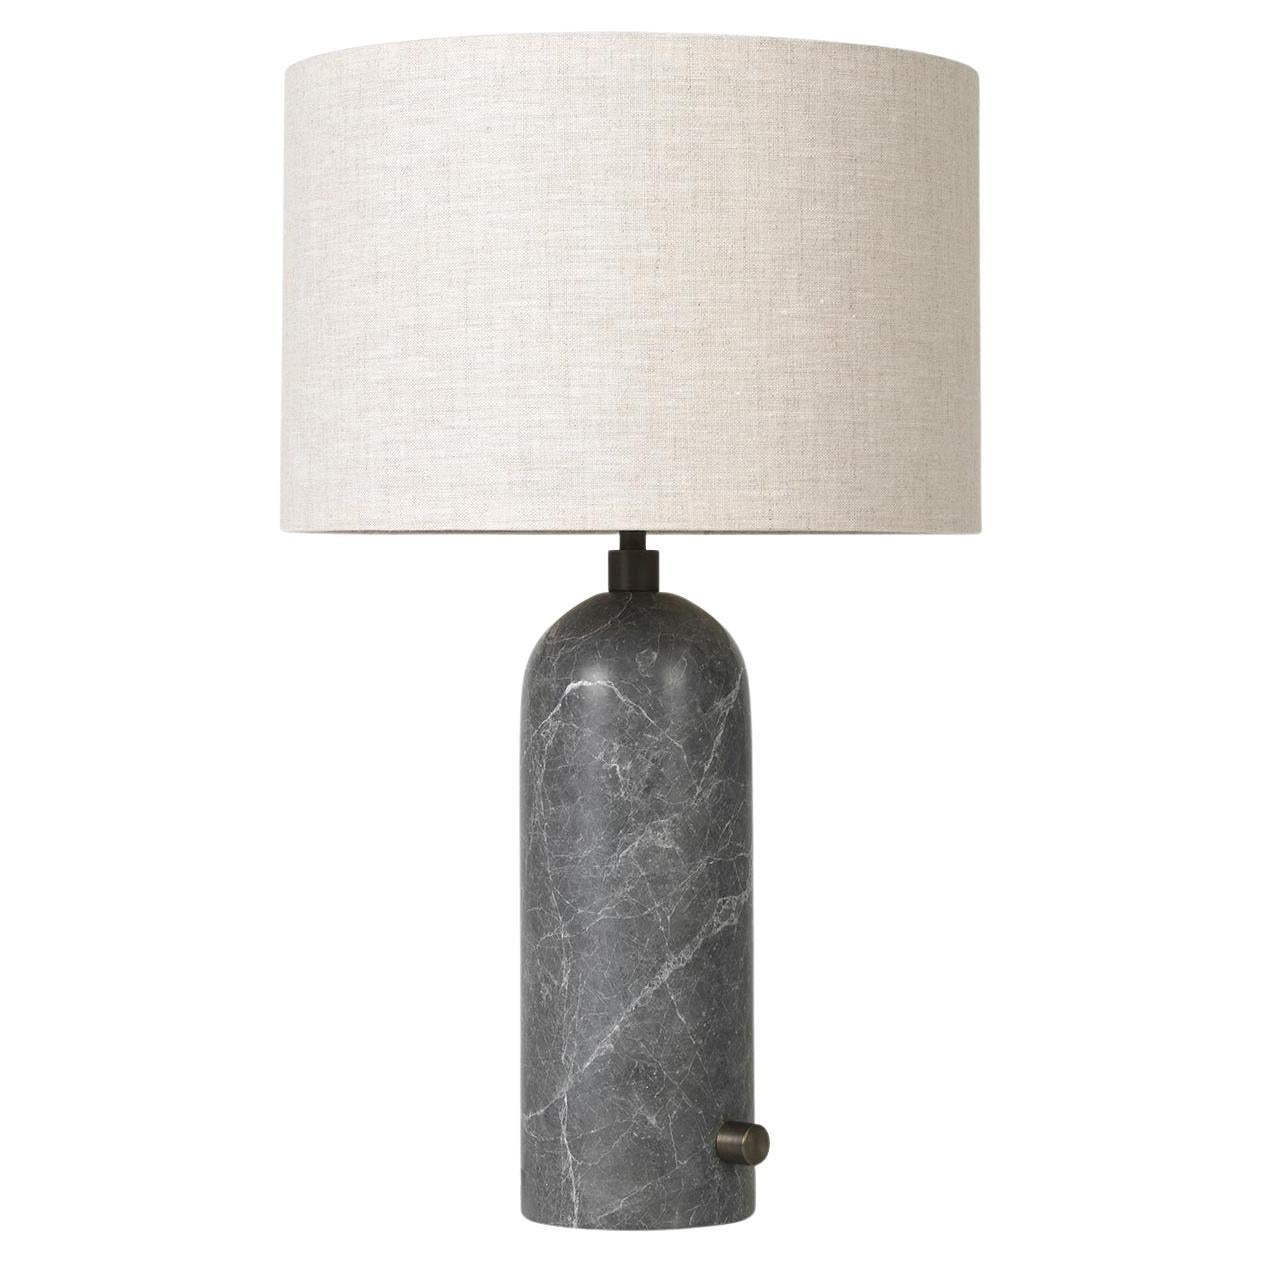 Gravity Table Lamp - Small, Grey Marble, Canvas